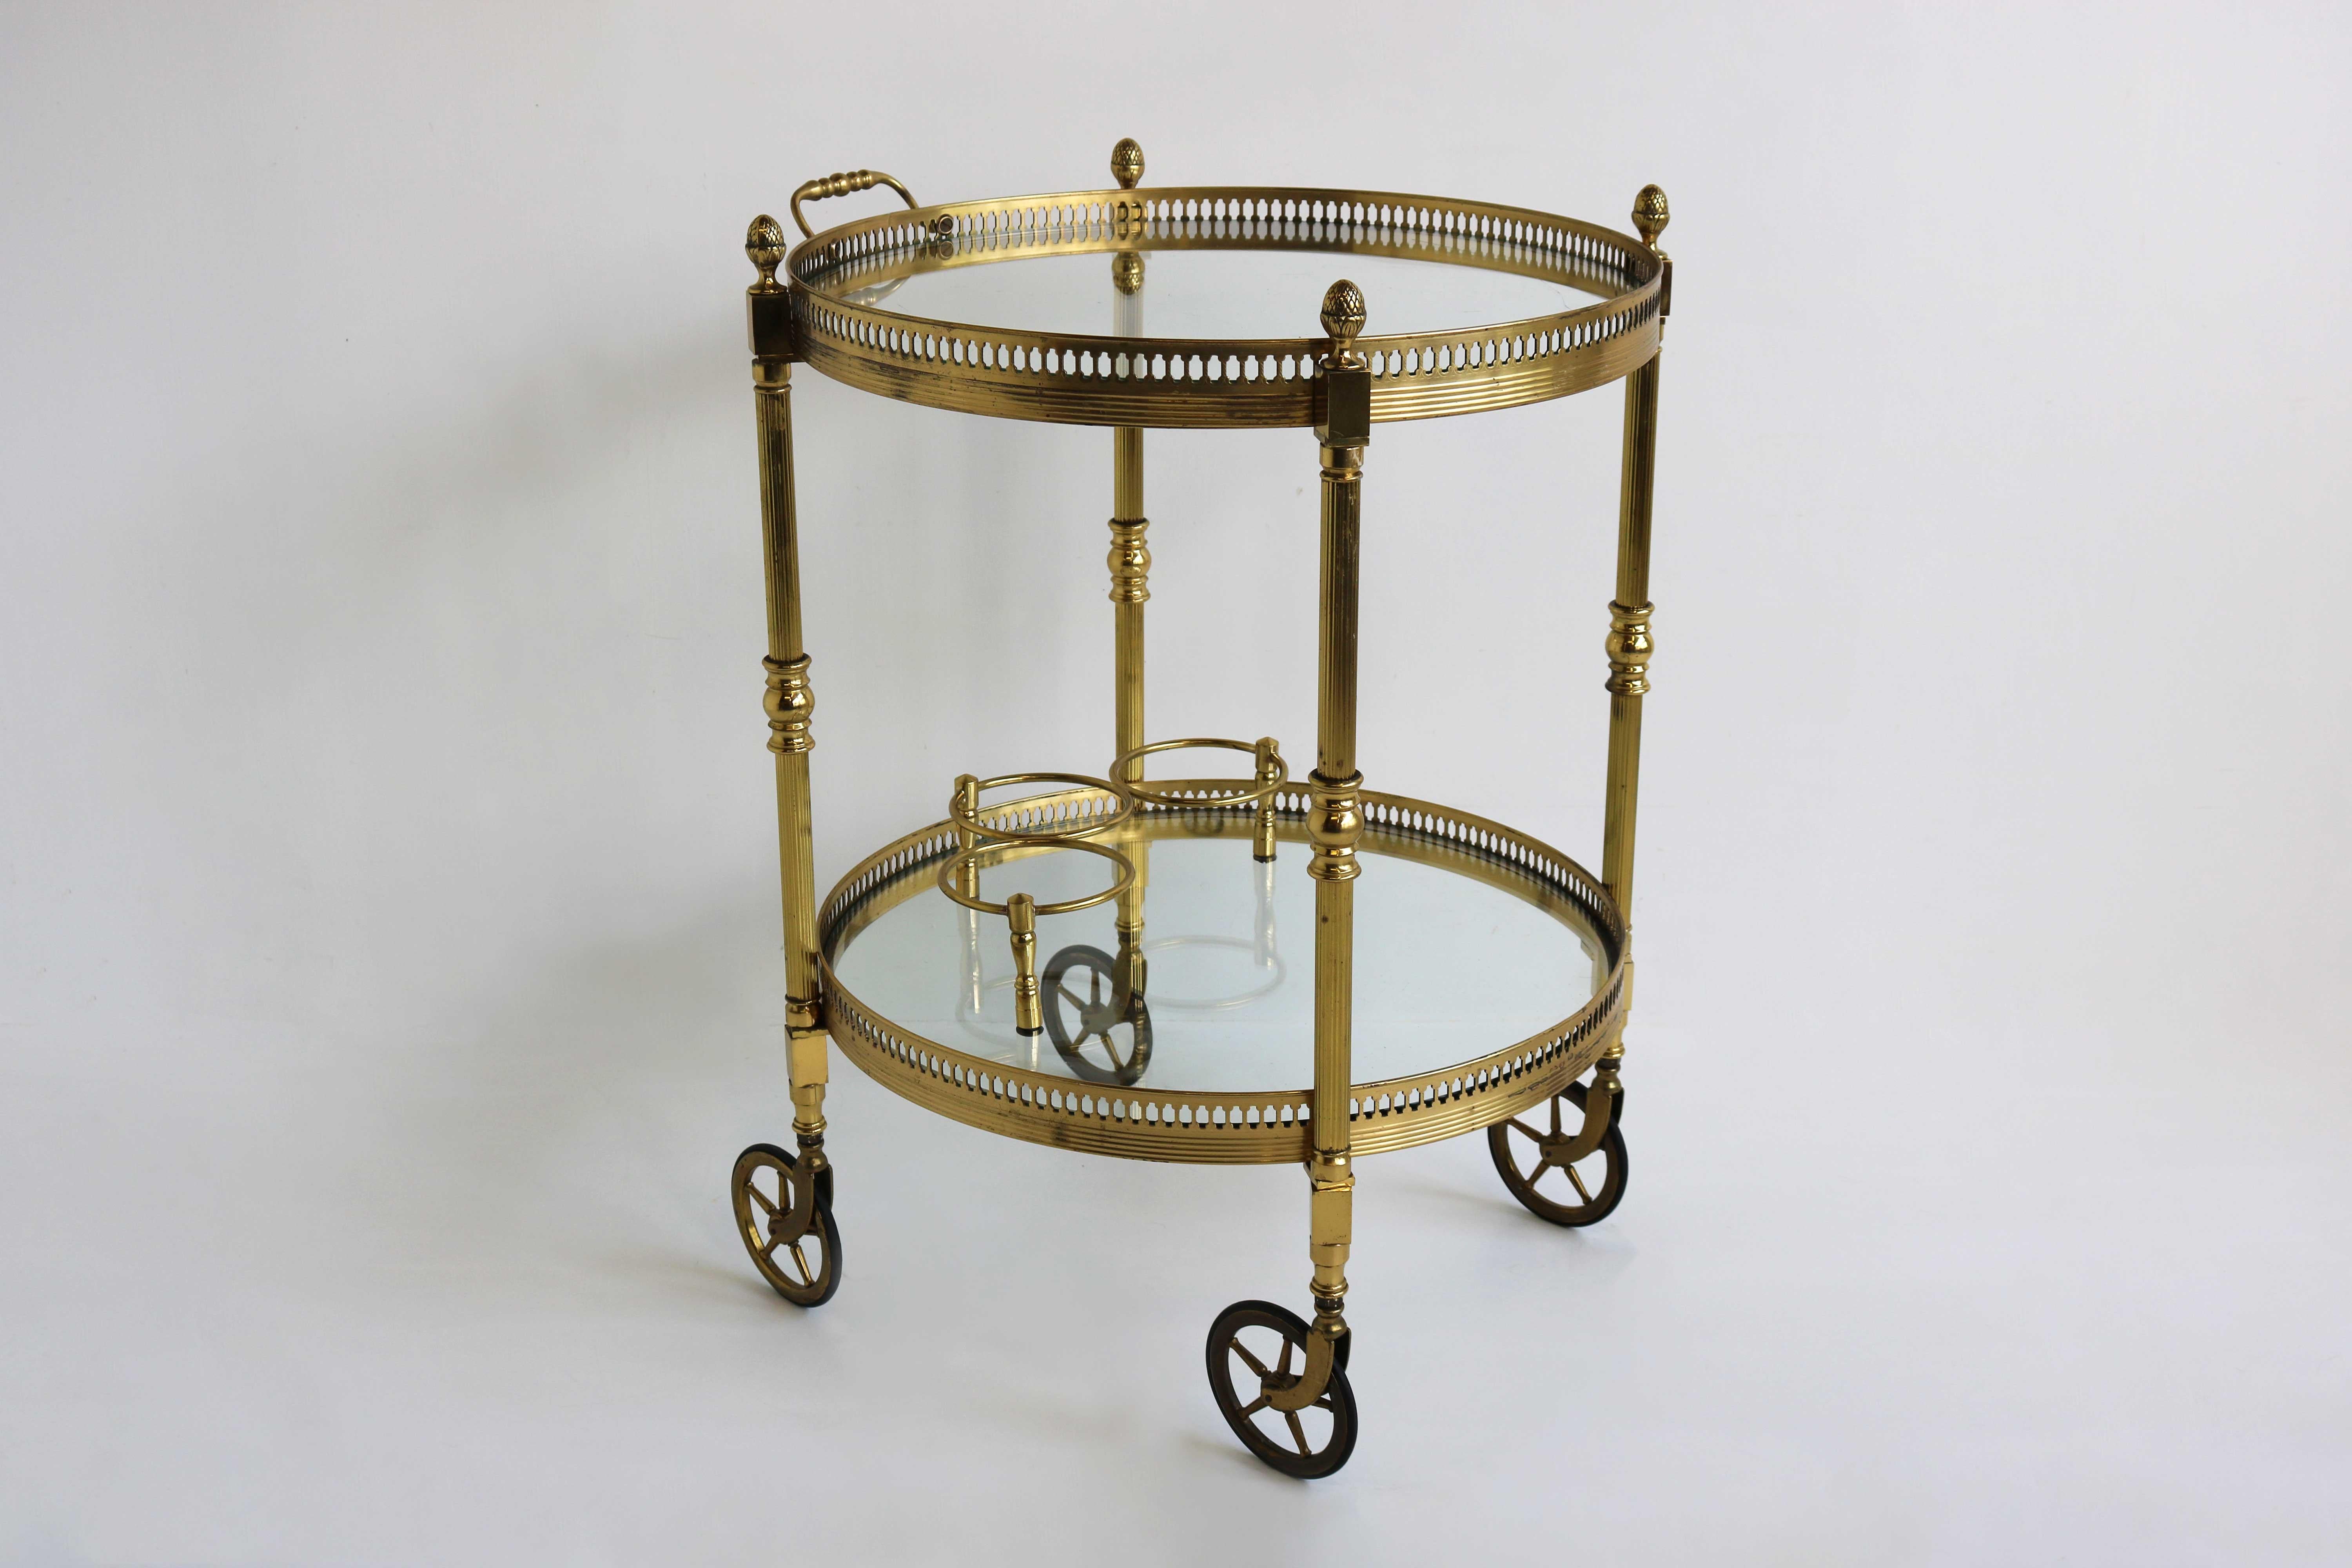 Neoclassical Style Maison Jansen French 1970 bar cart / drinks trolley brass glass round.
Superb two-level circular bar trolley / bar cart / serving trolley in brass, from famous French designer Maison Jansen, circa 1970.
Lovely round model with